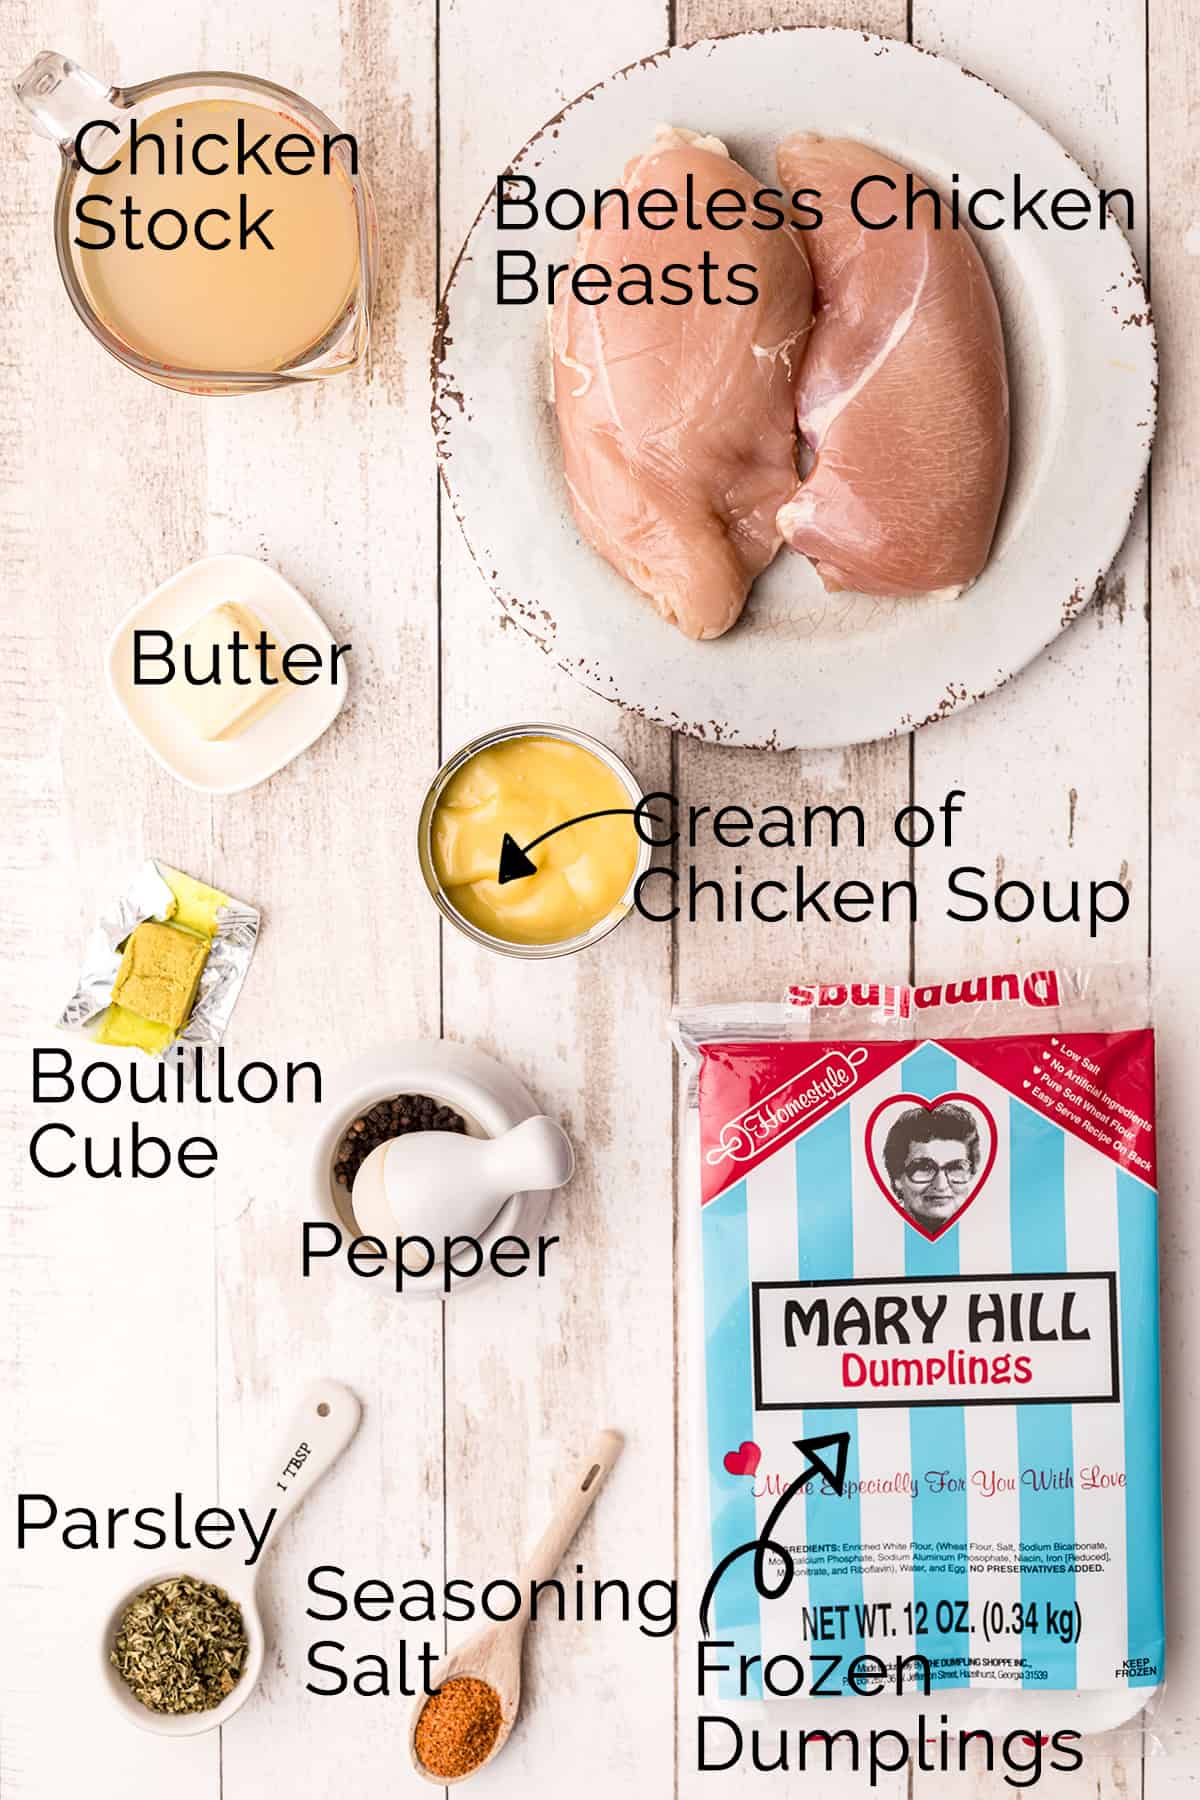 All ingredients needed to make slow cooker chicken and dumplings.